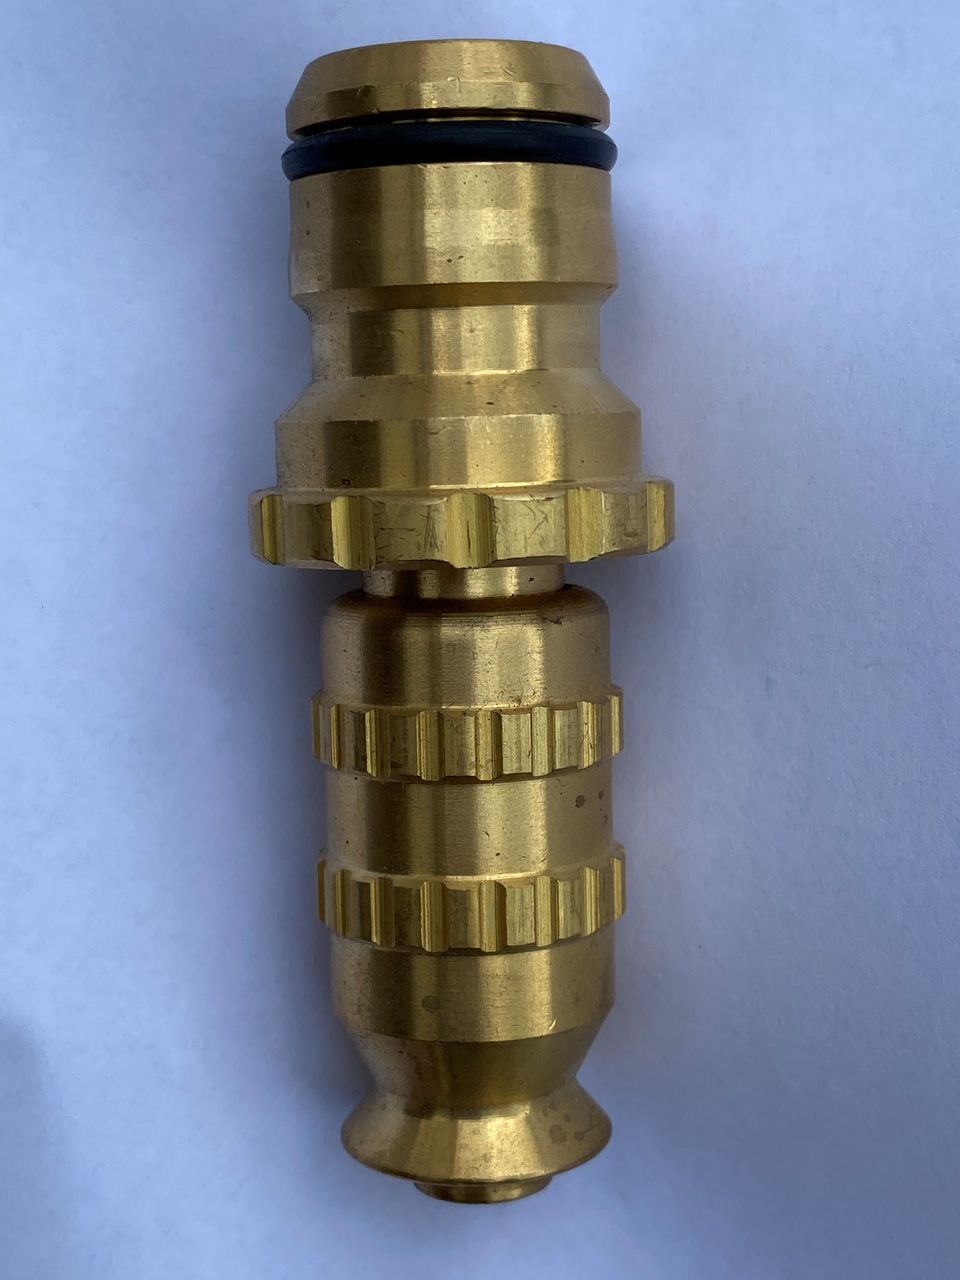 Brass "Jumbo" nozzle with 12mm Click-On Connection